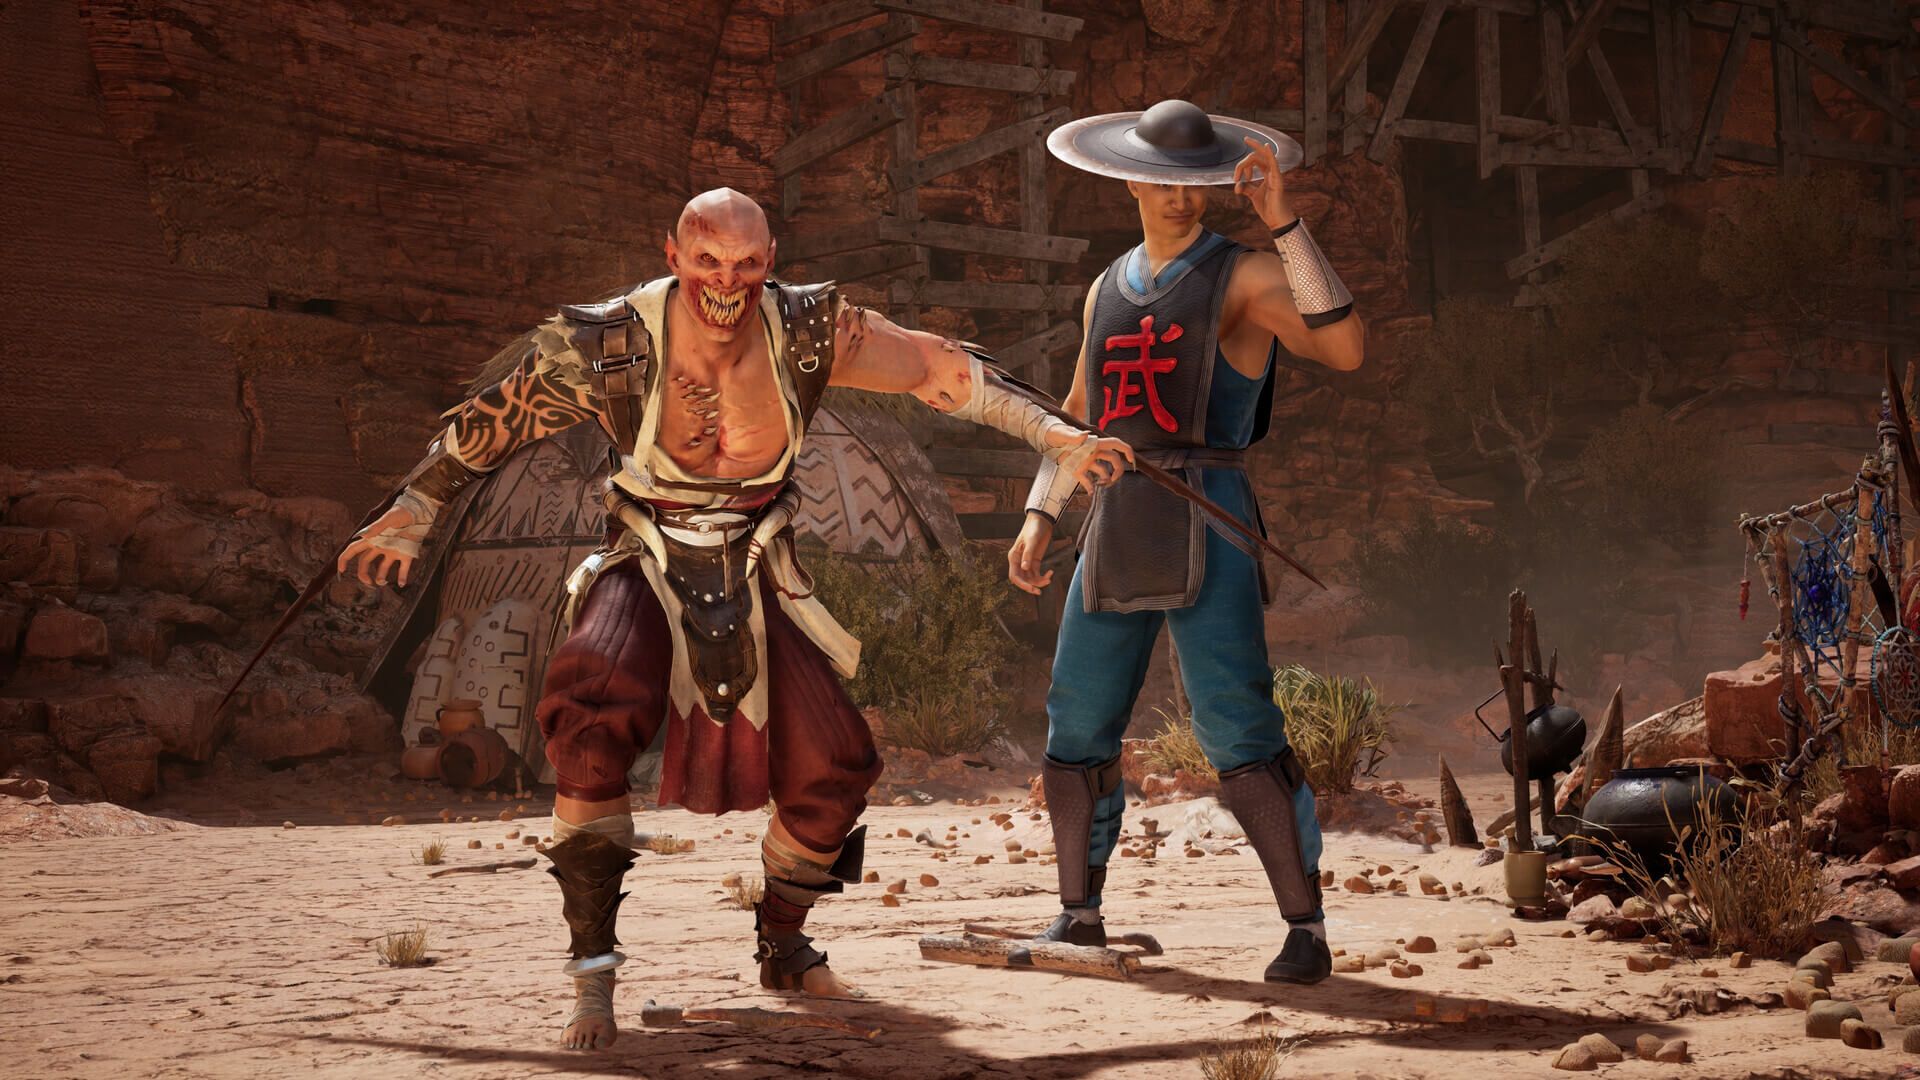 I hope Baraka will do his 'Blade Lift'-fatality if he turns out to be  'just' a Kameo. : r/MortalKombat